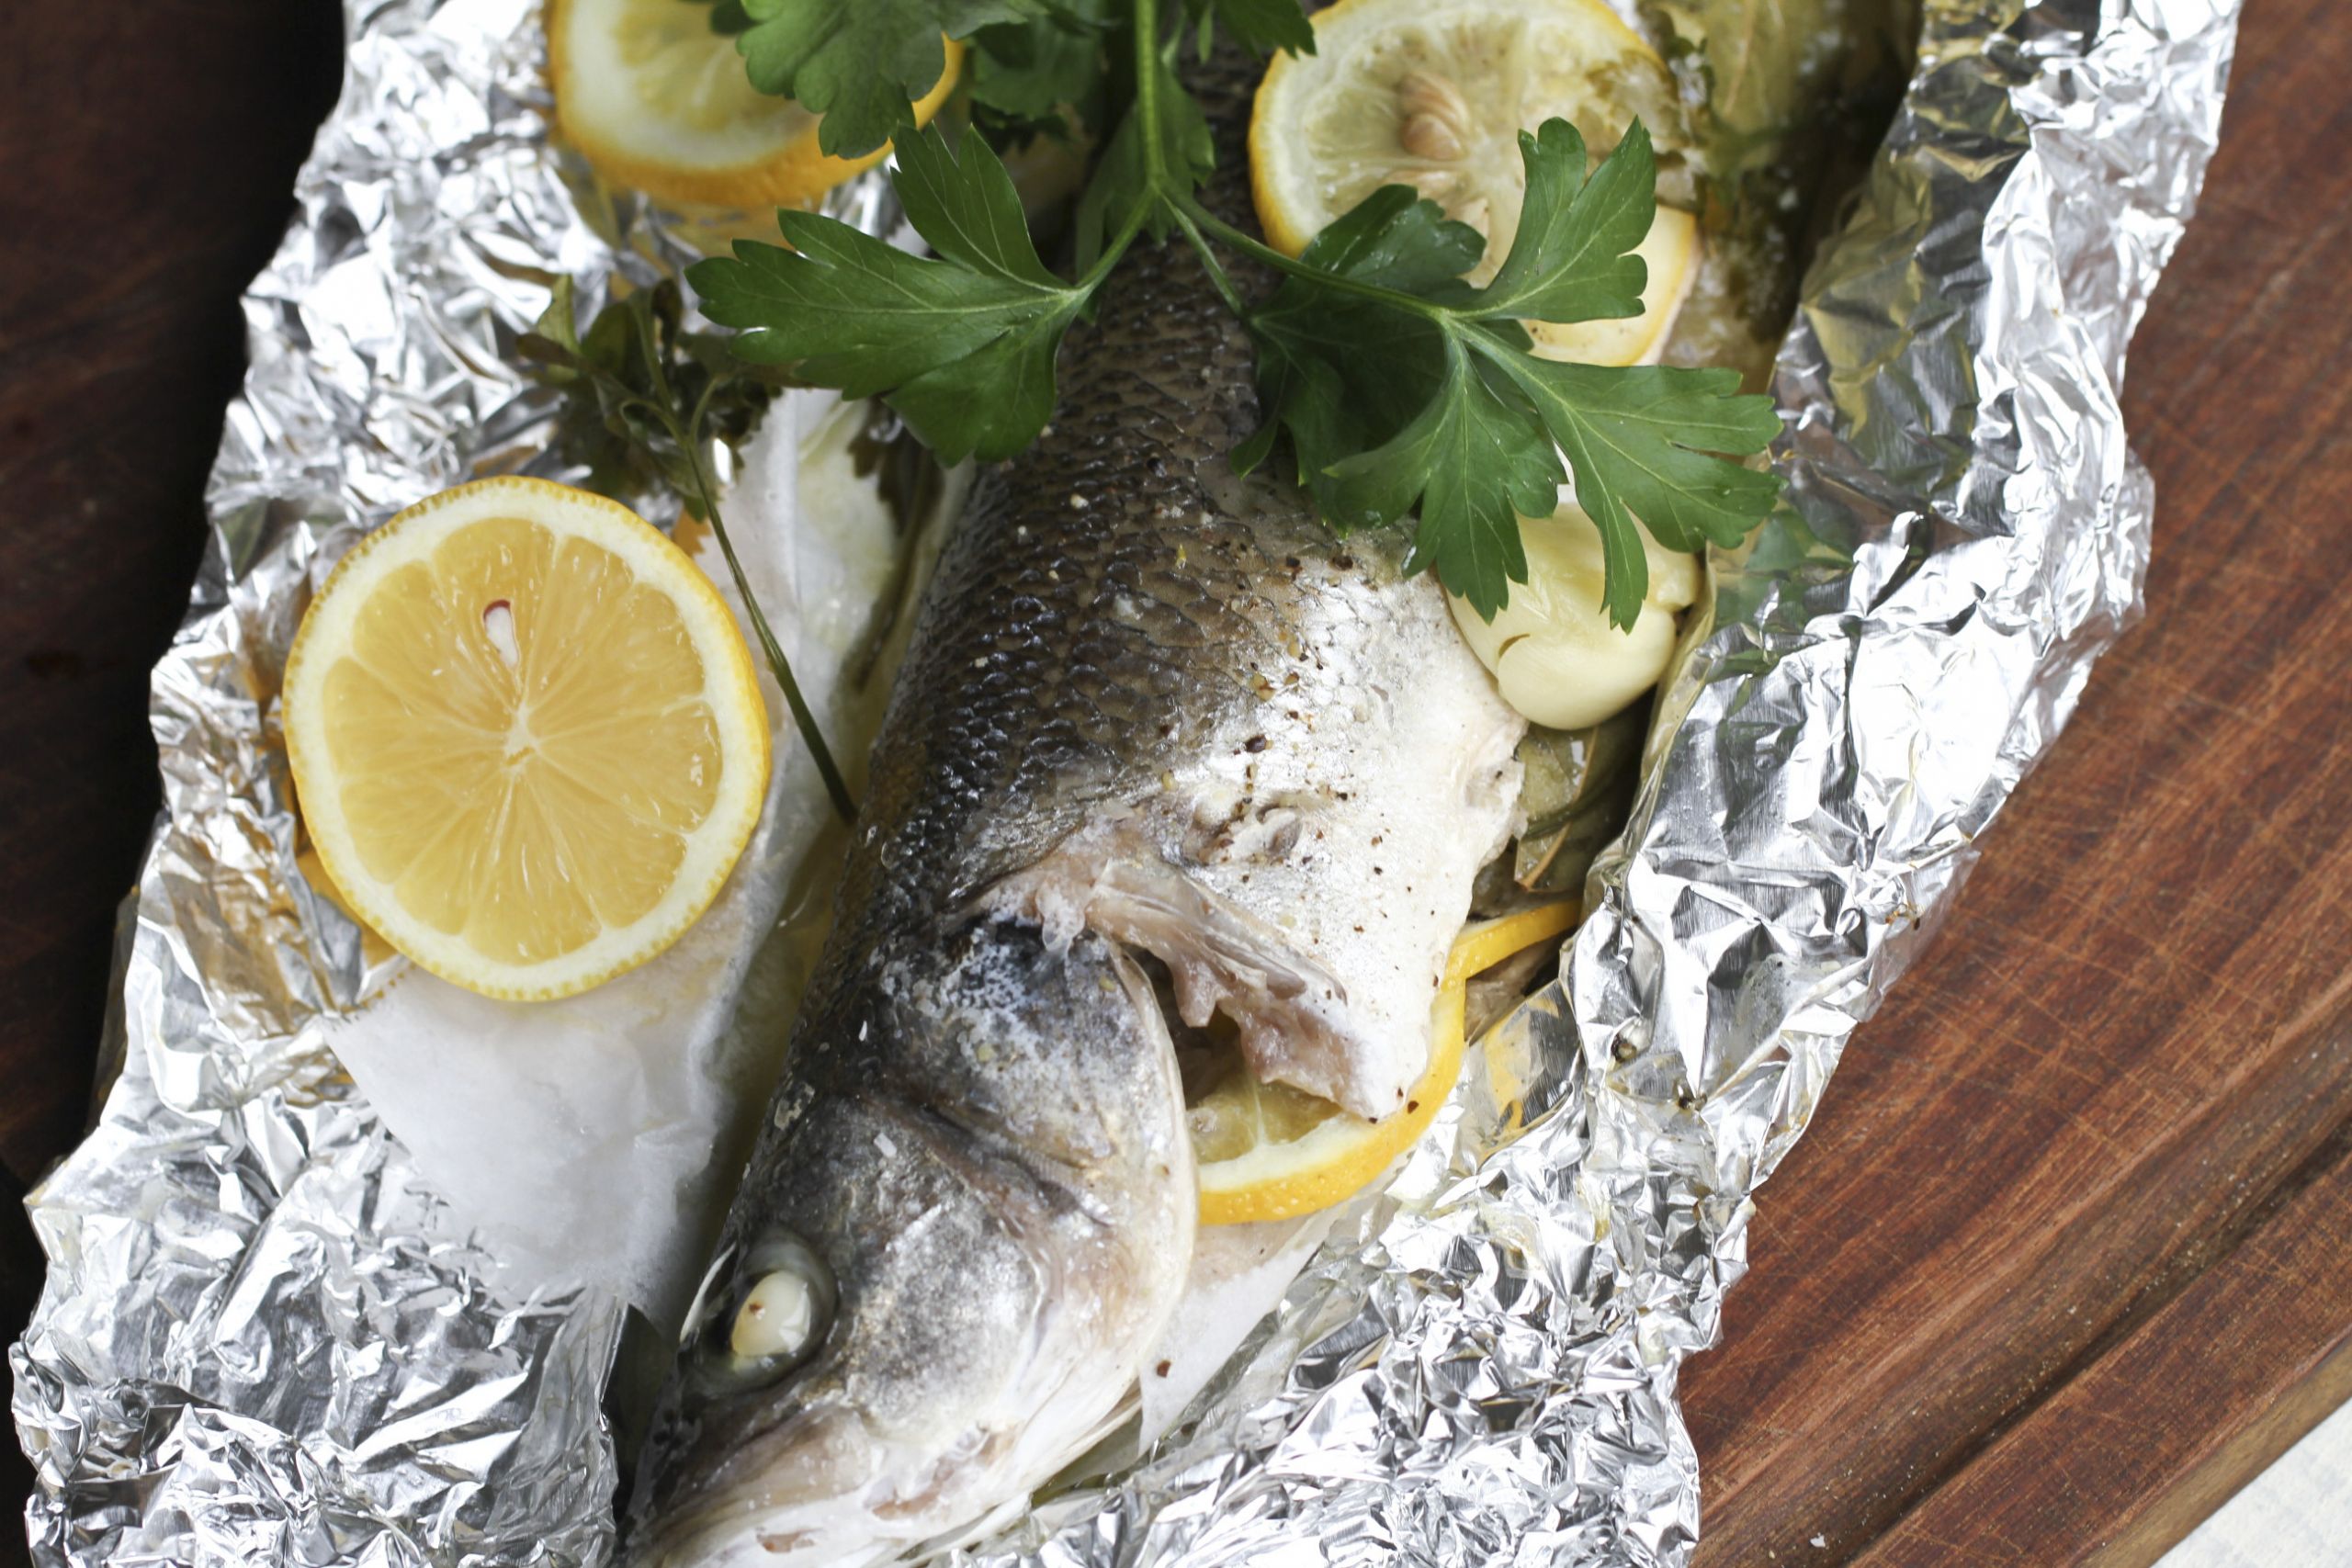 Baked whole Fish Recipes In Foil Luxury whole Fish Baked In A Foil Parcel Ever Open Sauce